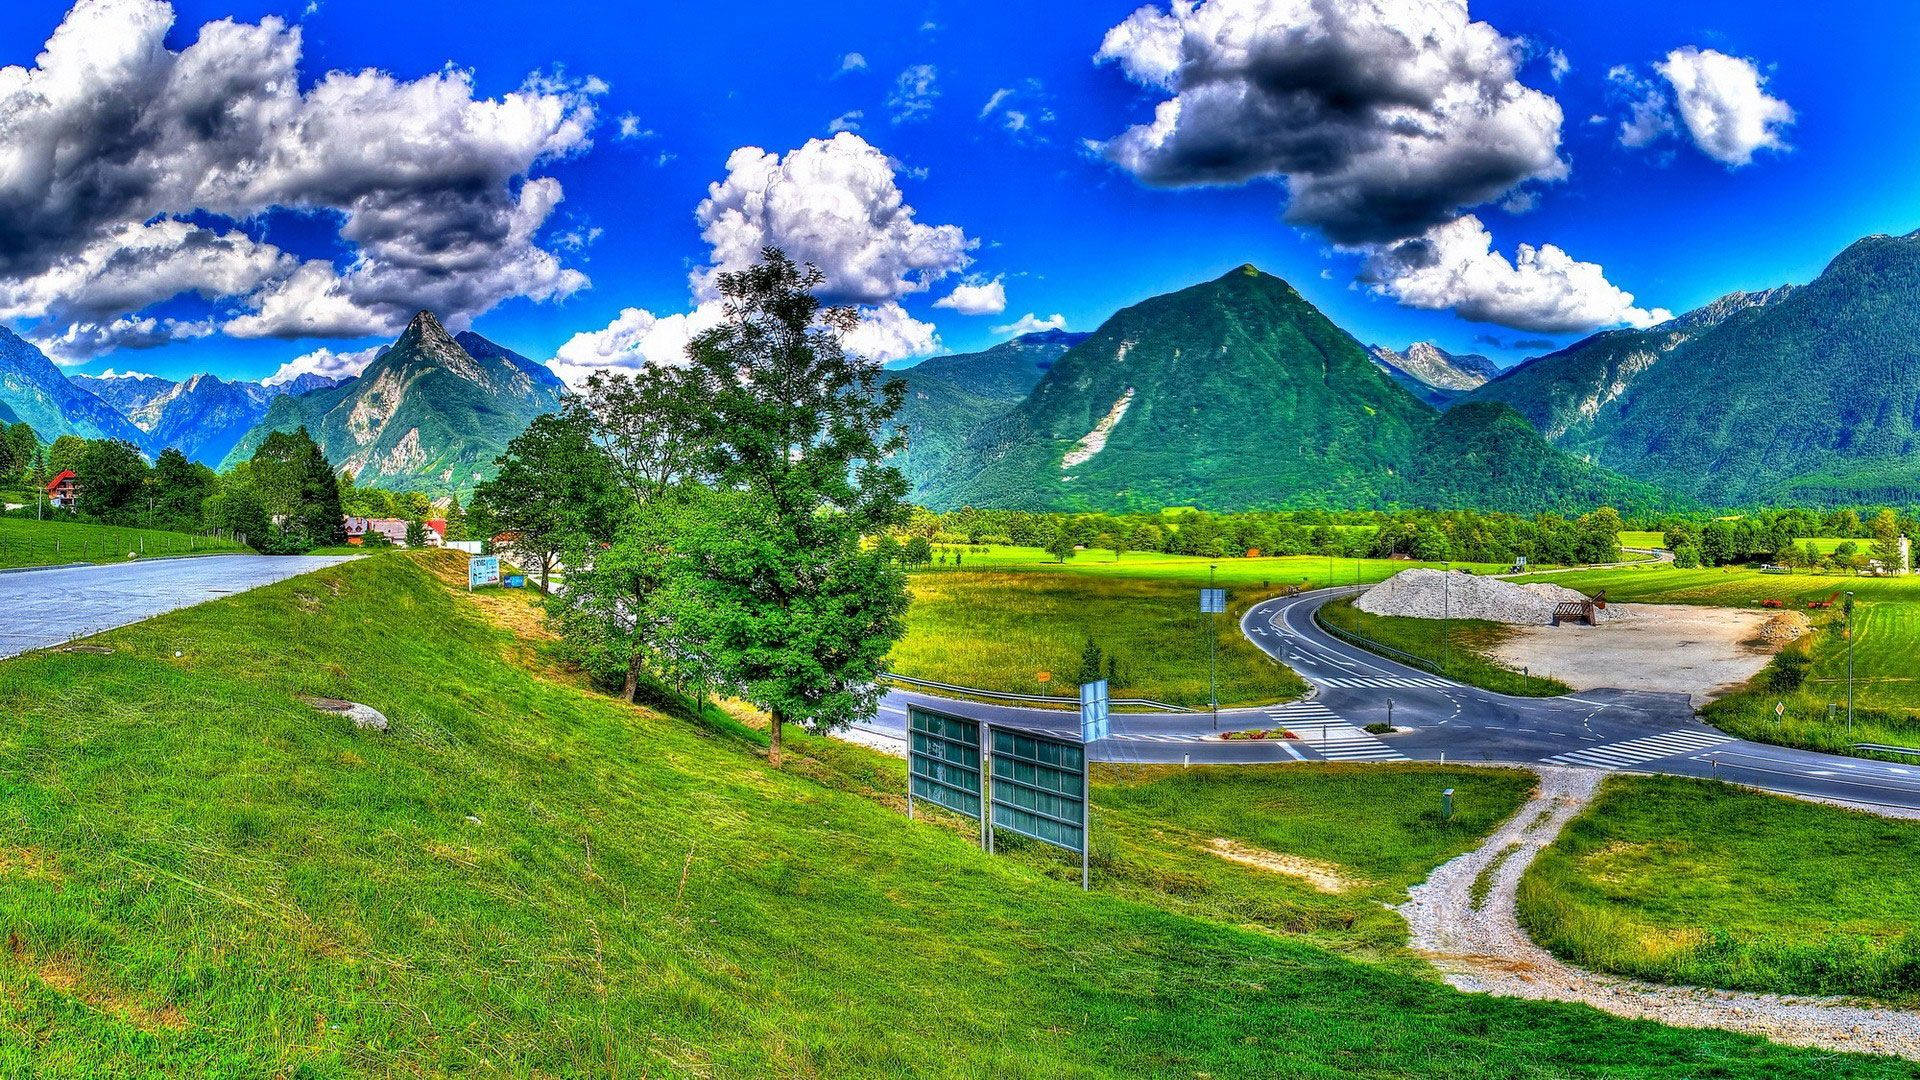 Landscape Mountain Photograph In Europe Picture